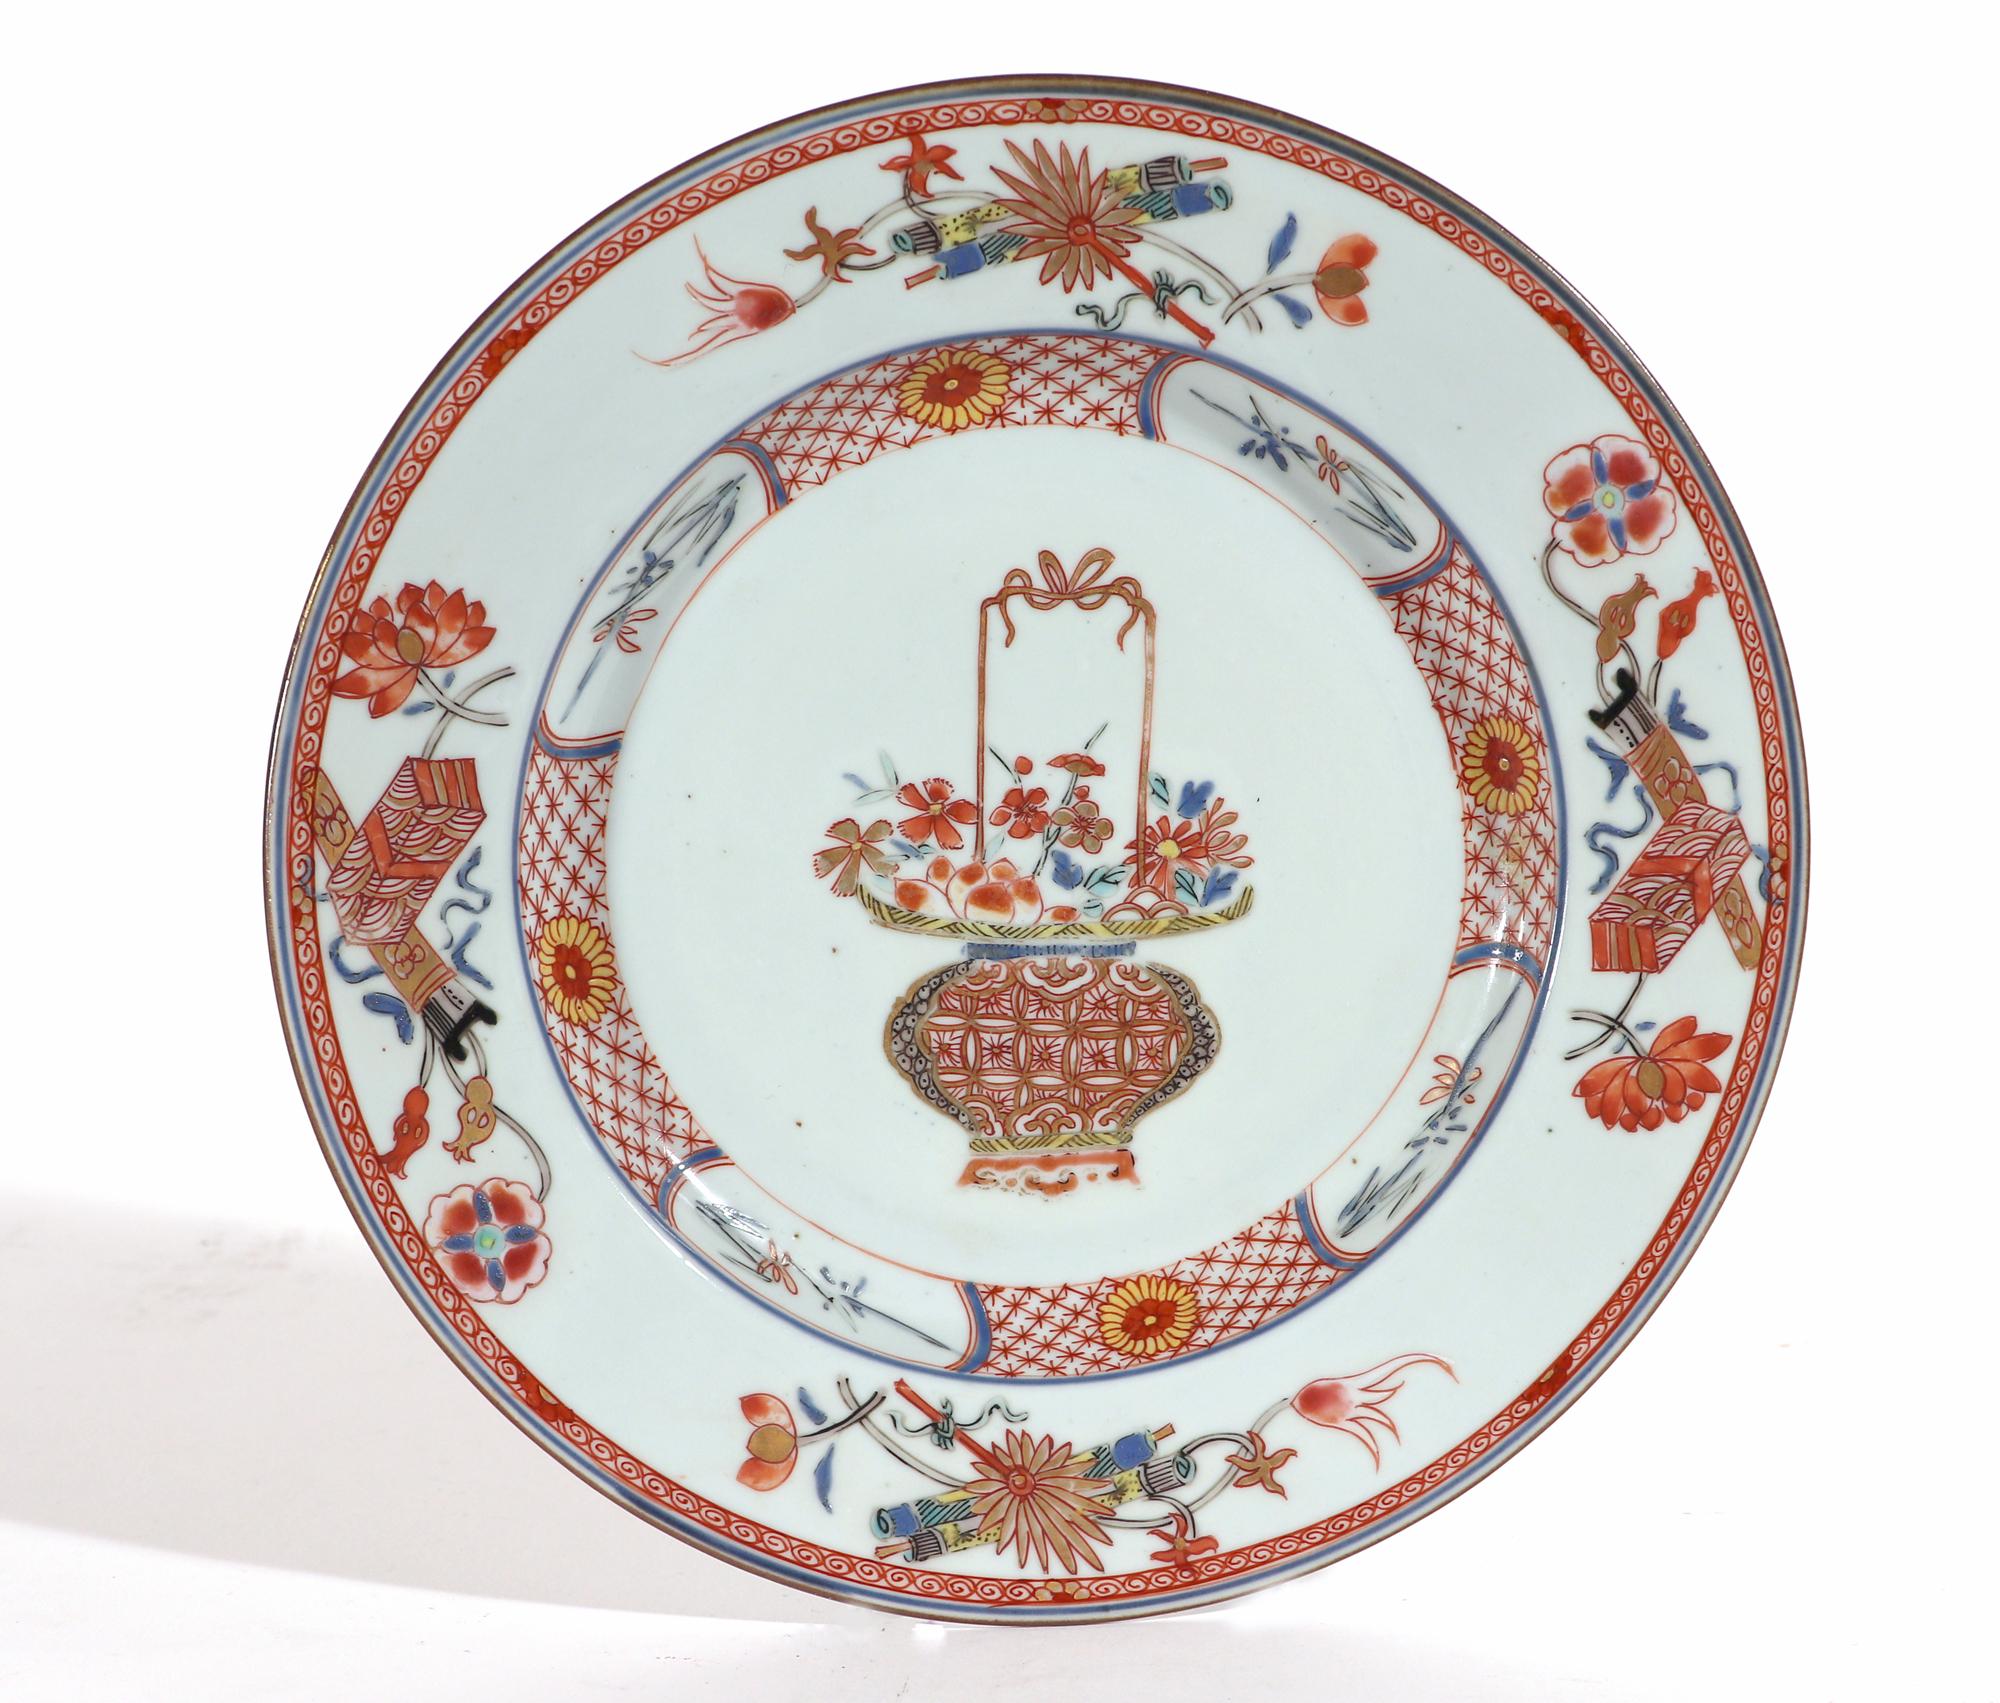 Chinese Export Porcelain Famille Rose-Verte Plates Painted with A Flower Basket For Sale 3